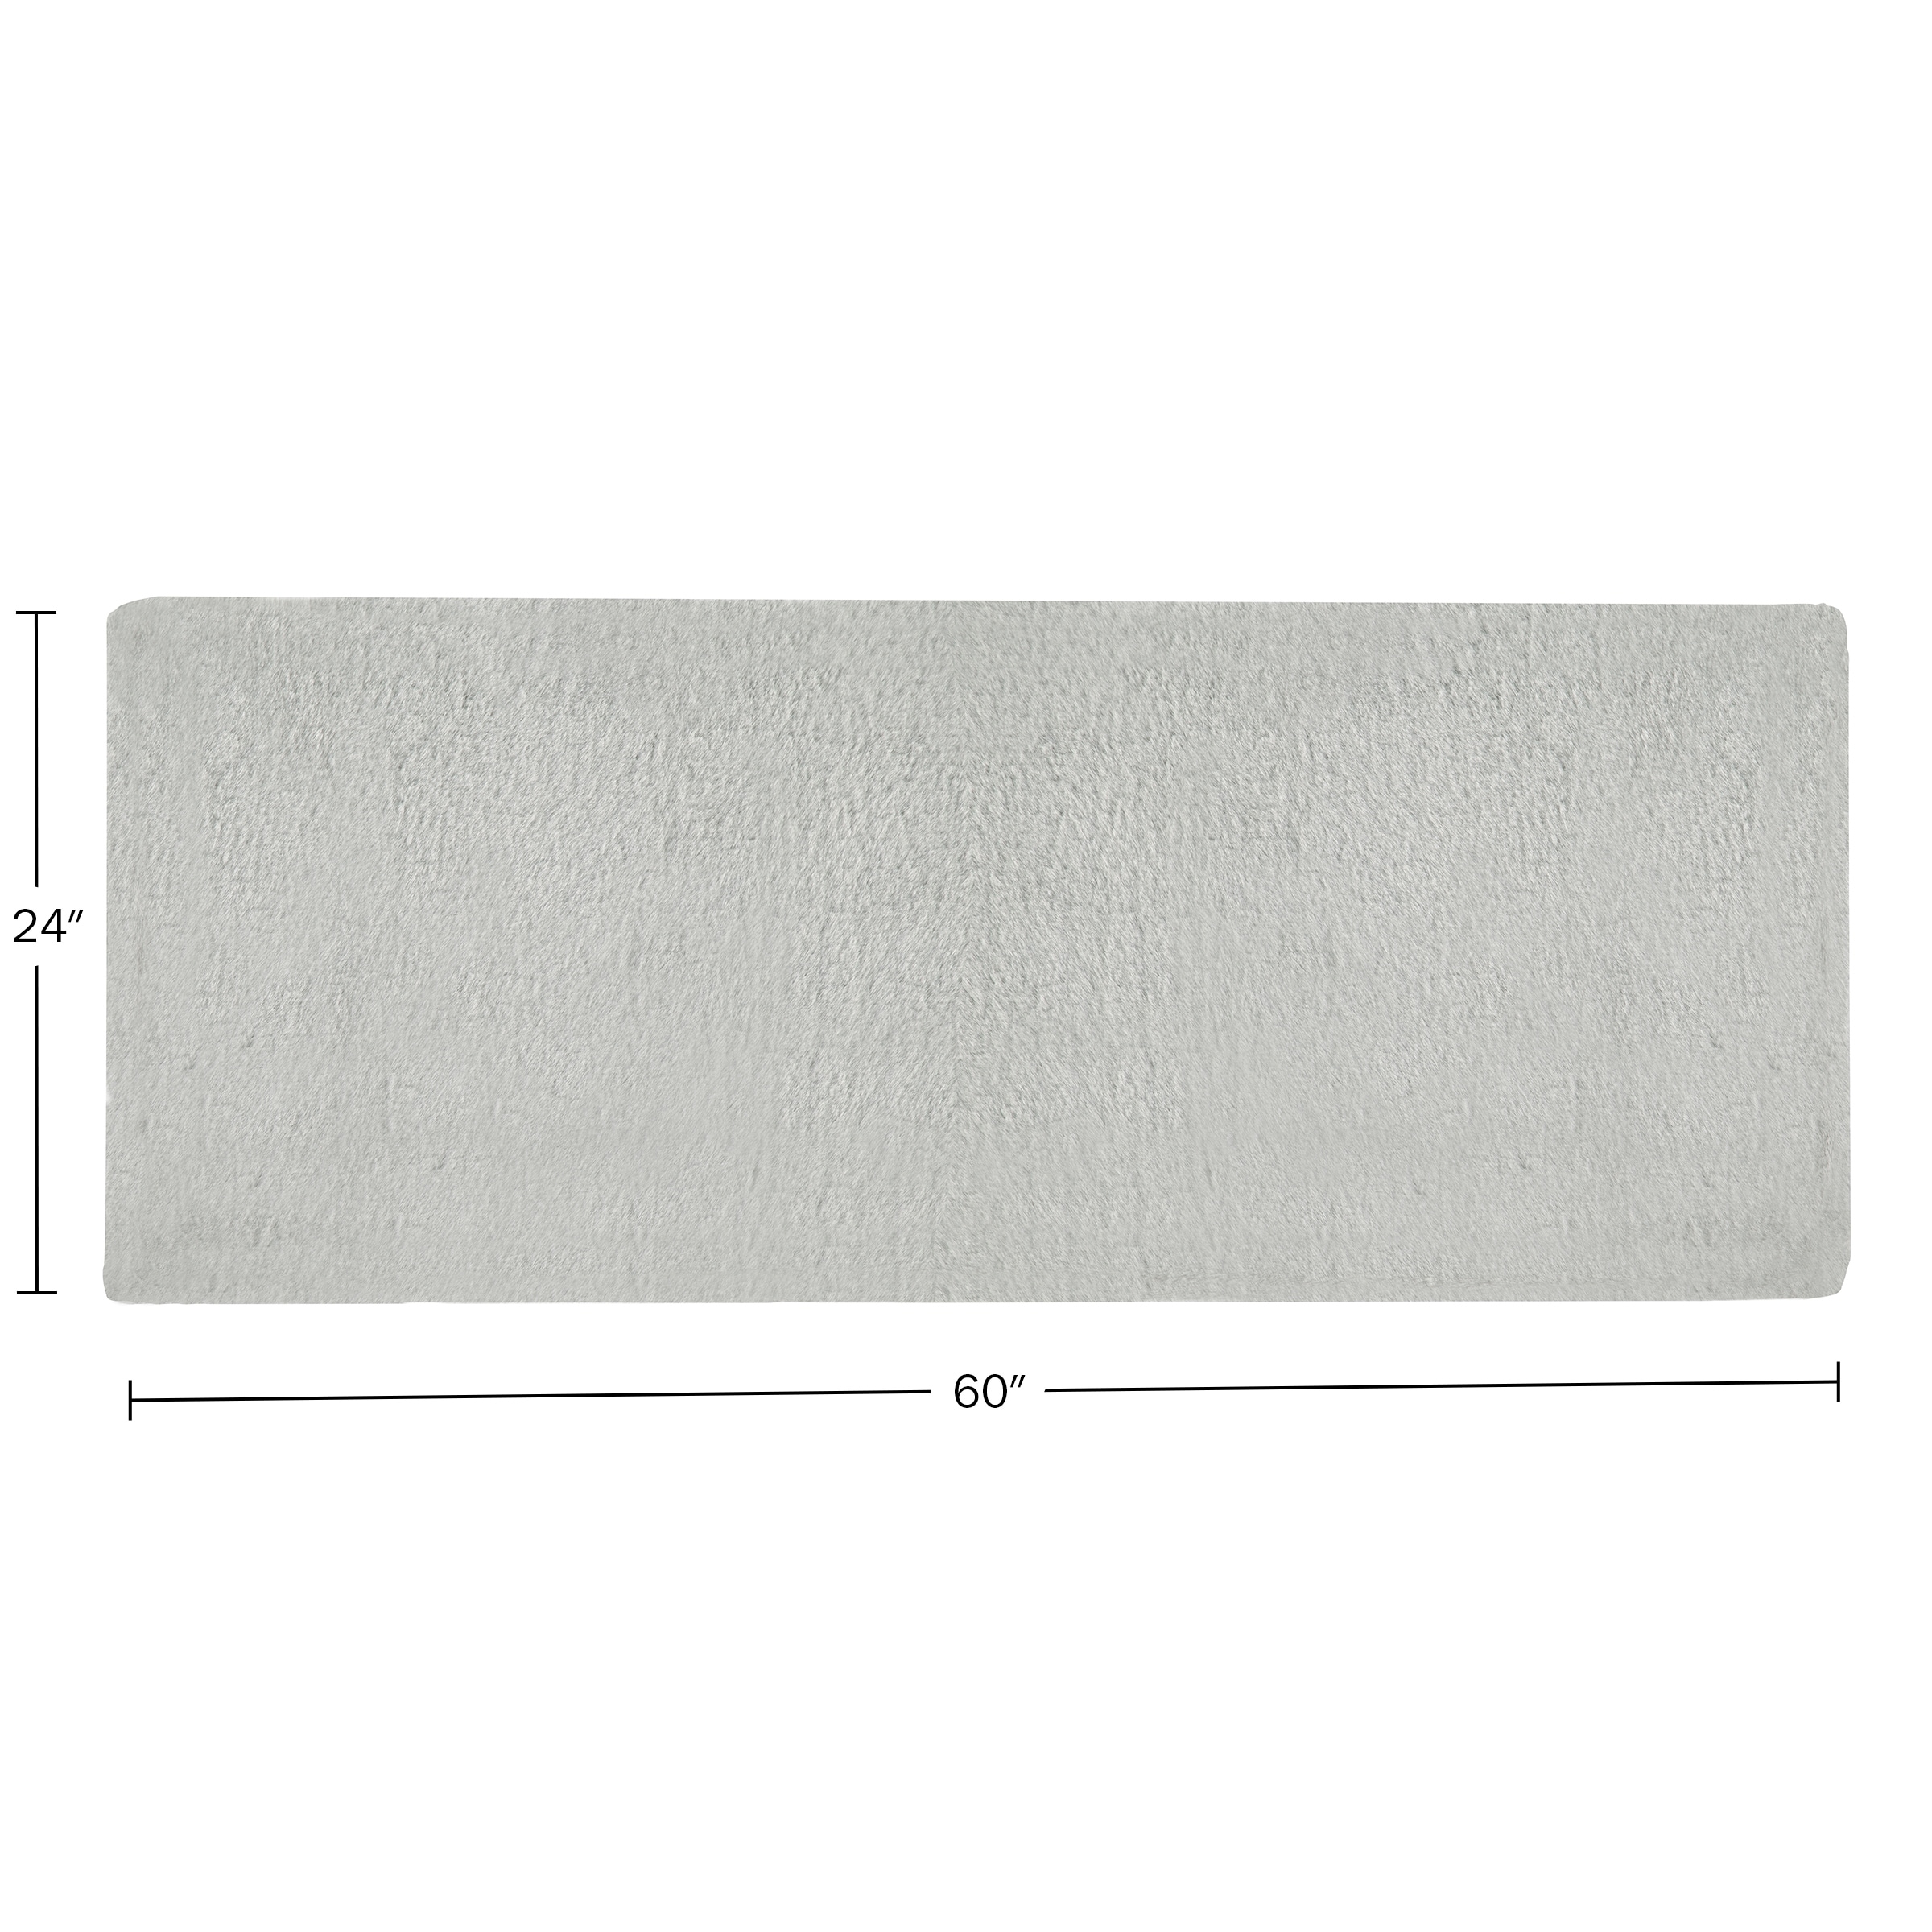 https://ak1.ostkcdn.com/images/products/is/images/direct/3c106adc73722b657a9bdbc2735fcaefa06c1b23/Faux-Fur-Bath-Mat---21x60-Inch-Nonslip-Rug-by-Home-Complete.jpg